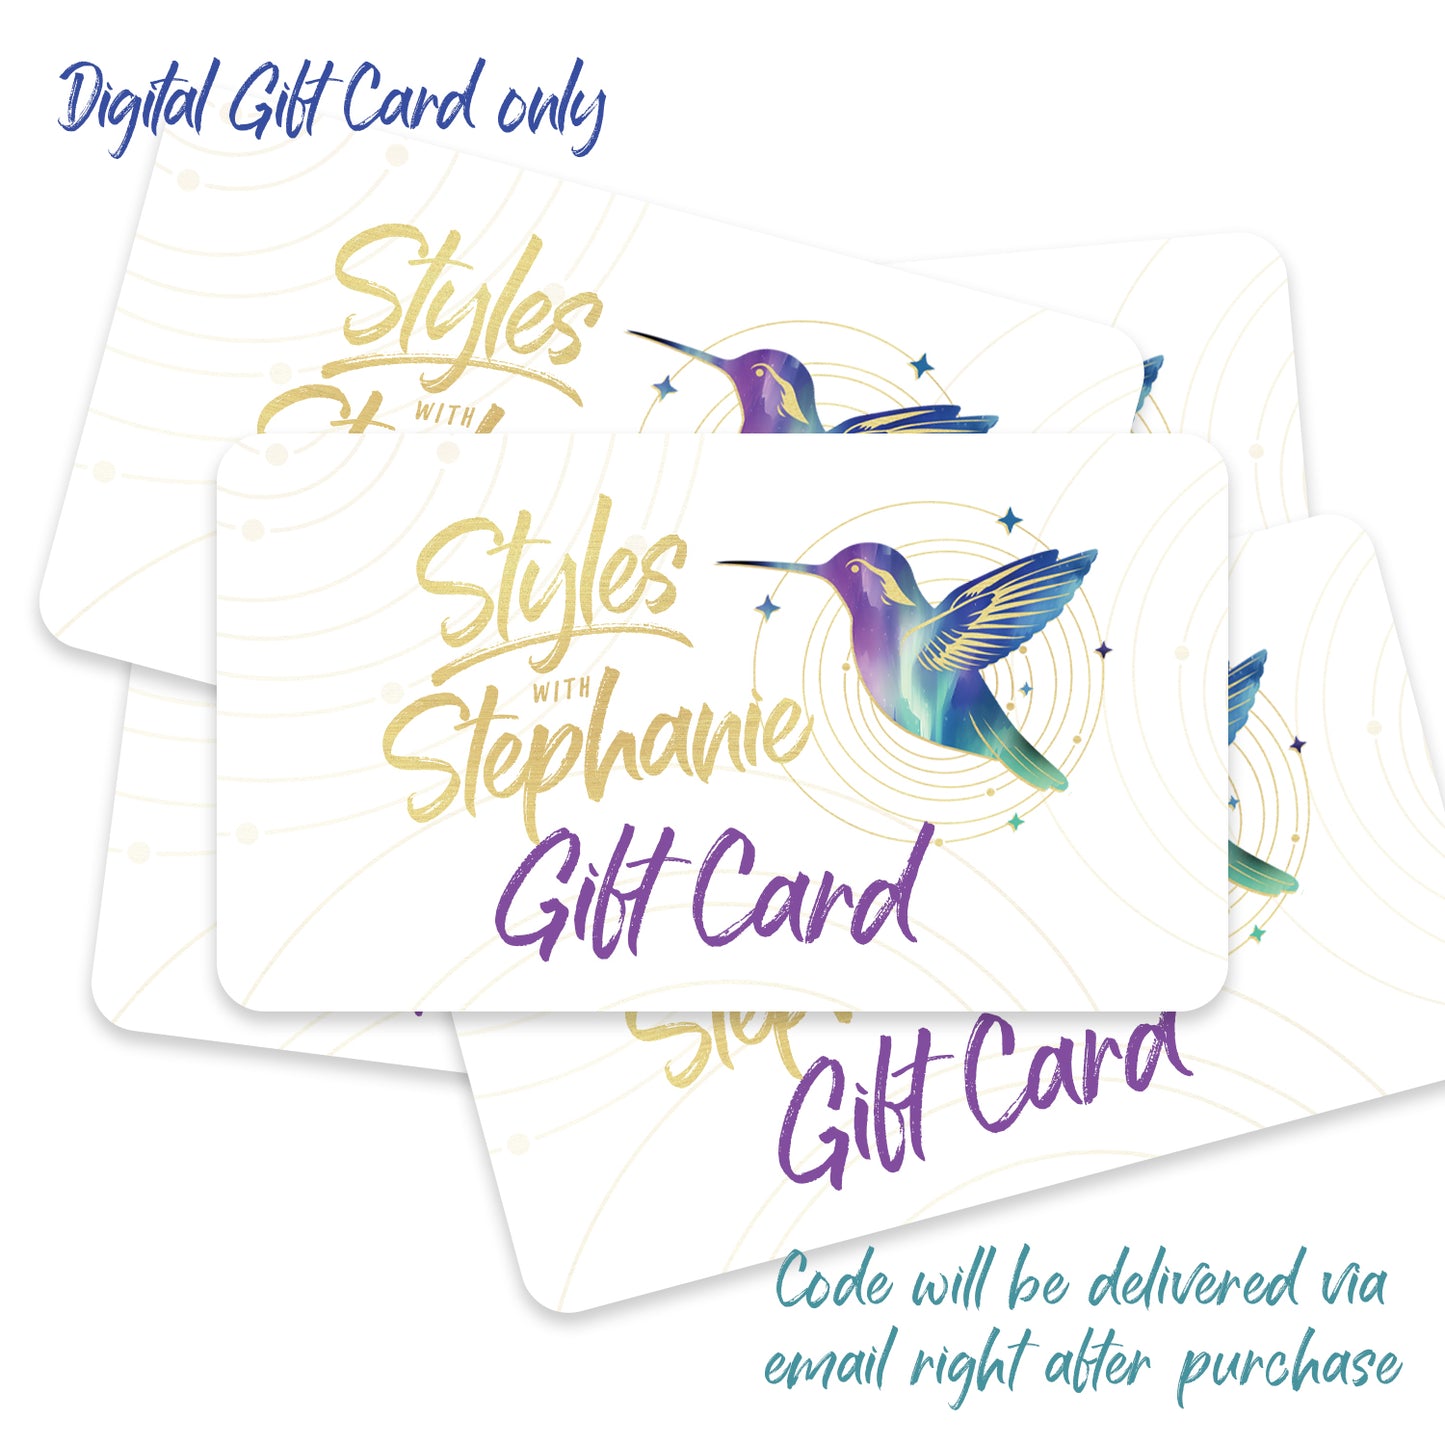 Styles with Stephanie Gift Card